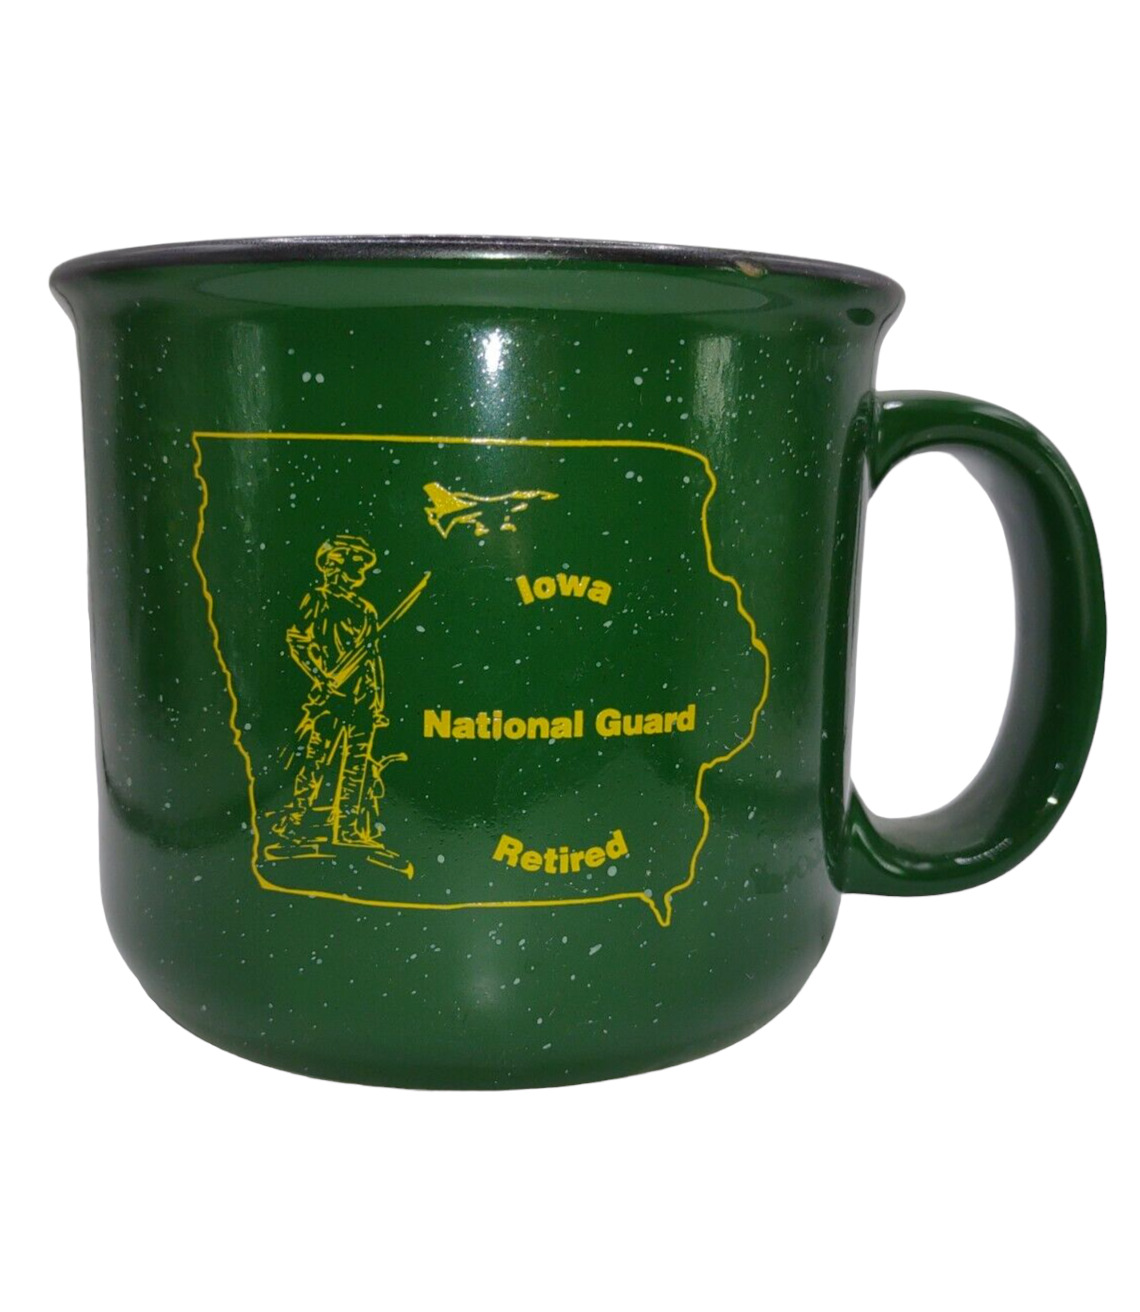 IOWA National Guard Retired Military Soldier Speckled Campfire Coffee Mug Cup